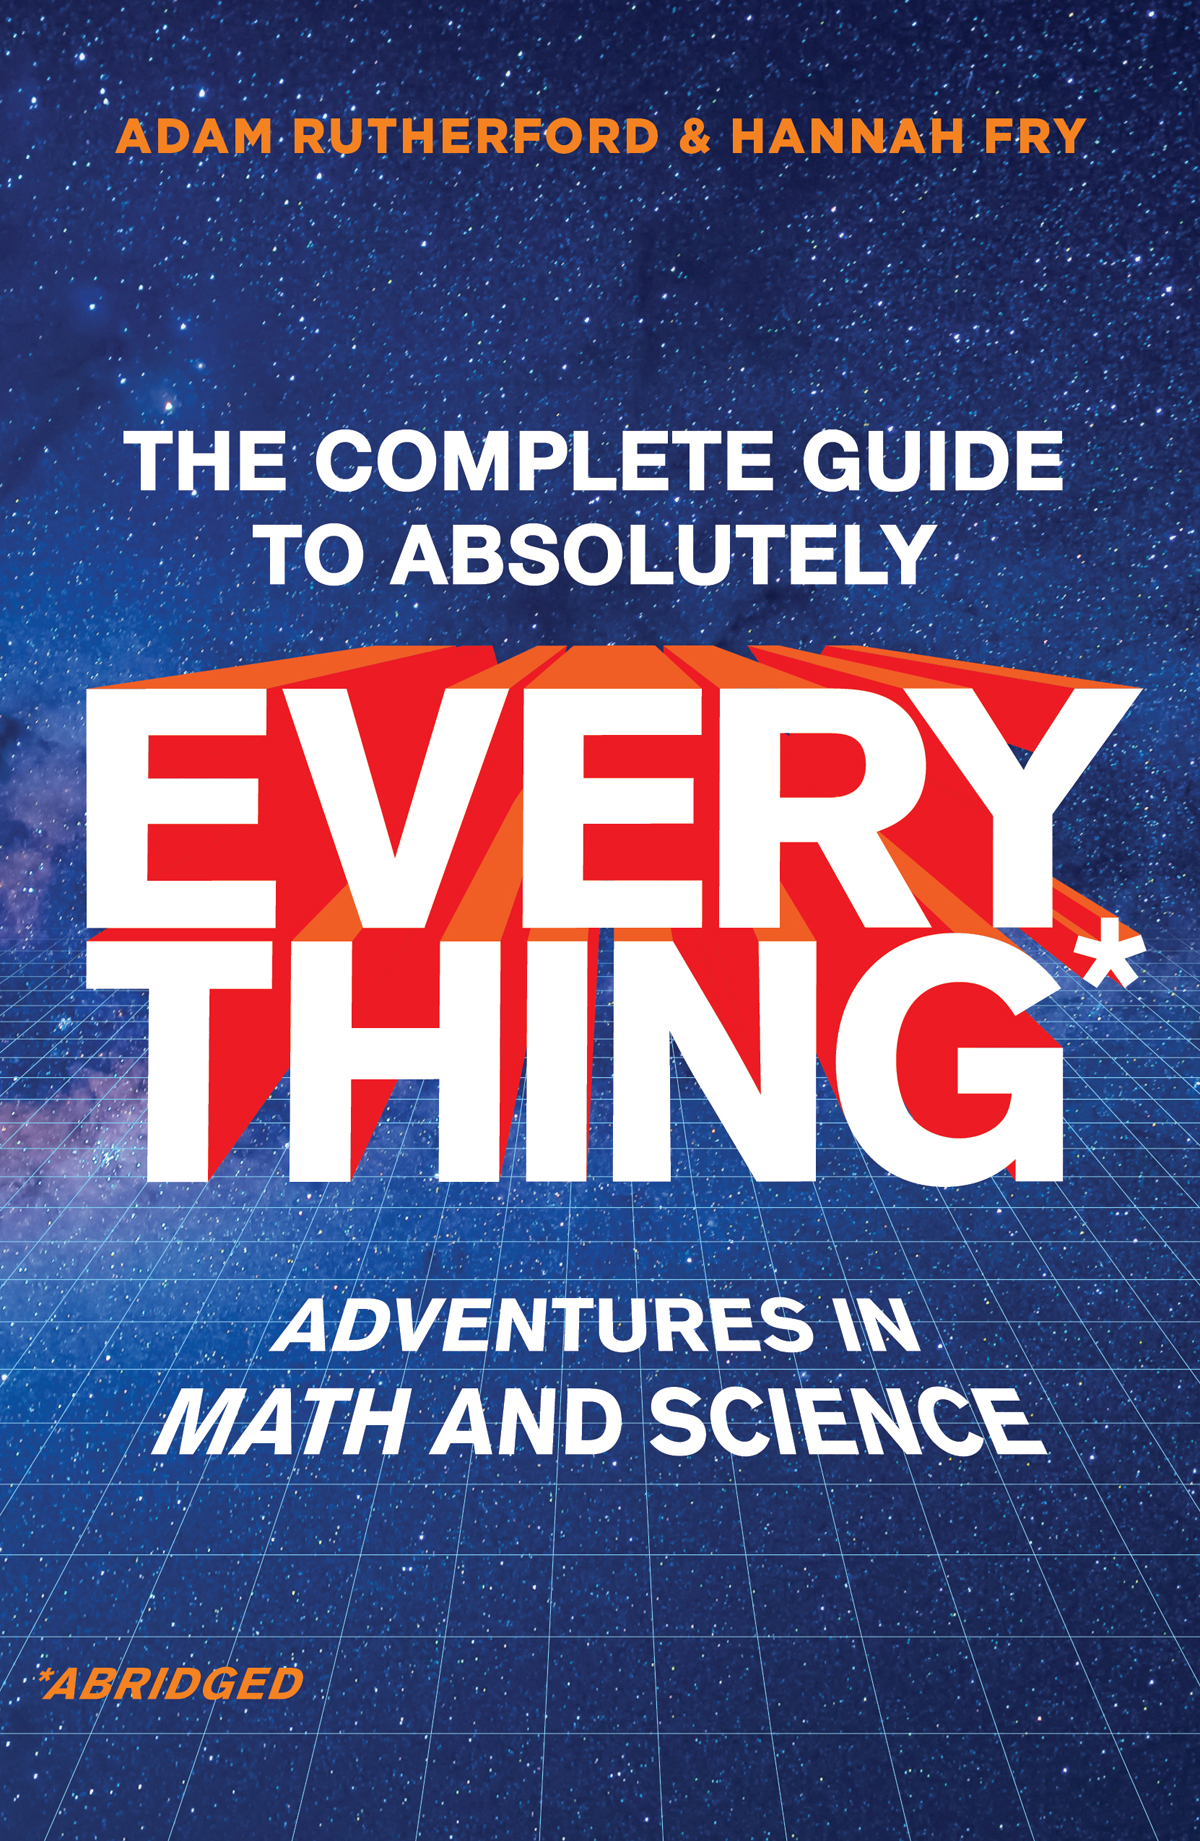 THE COMPLETE GUIDE TO ABSOLUTELY ABRIDGED Adventures in Math and Science - photo 1